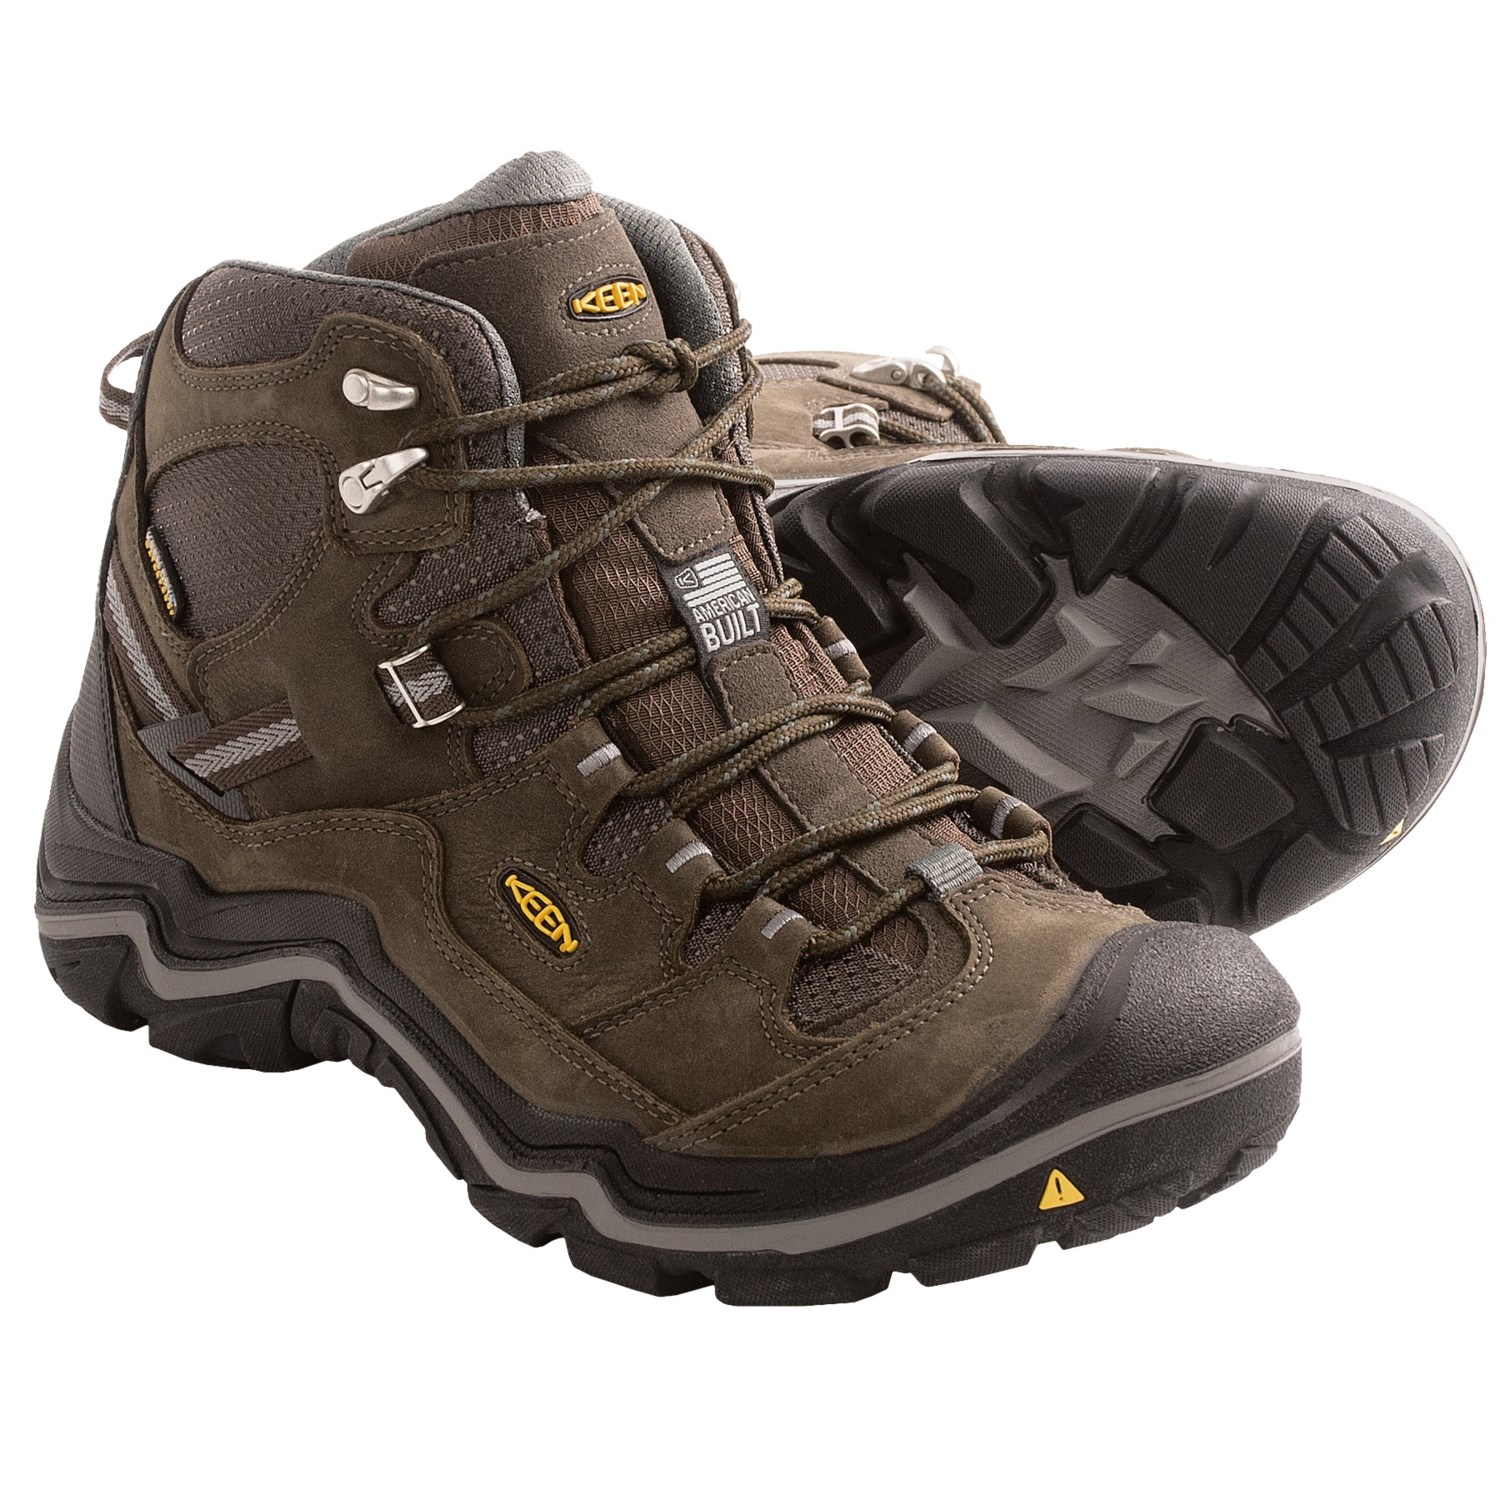 Keen Durand Hiking Boots (For Men) - Save 35%